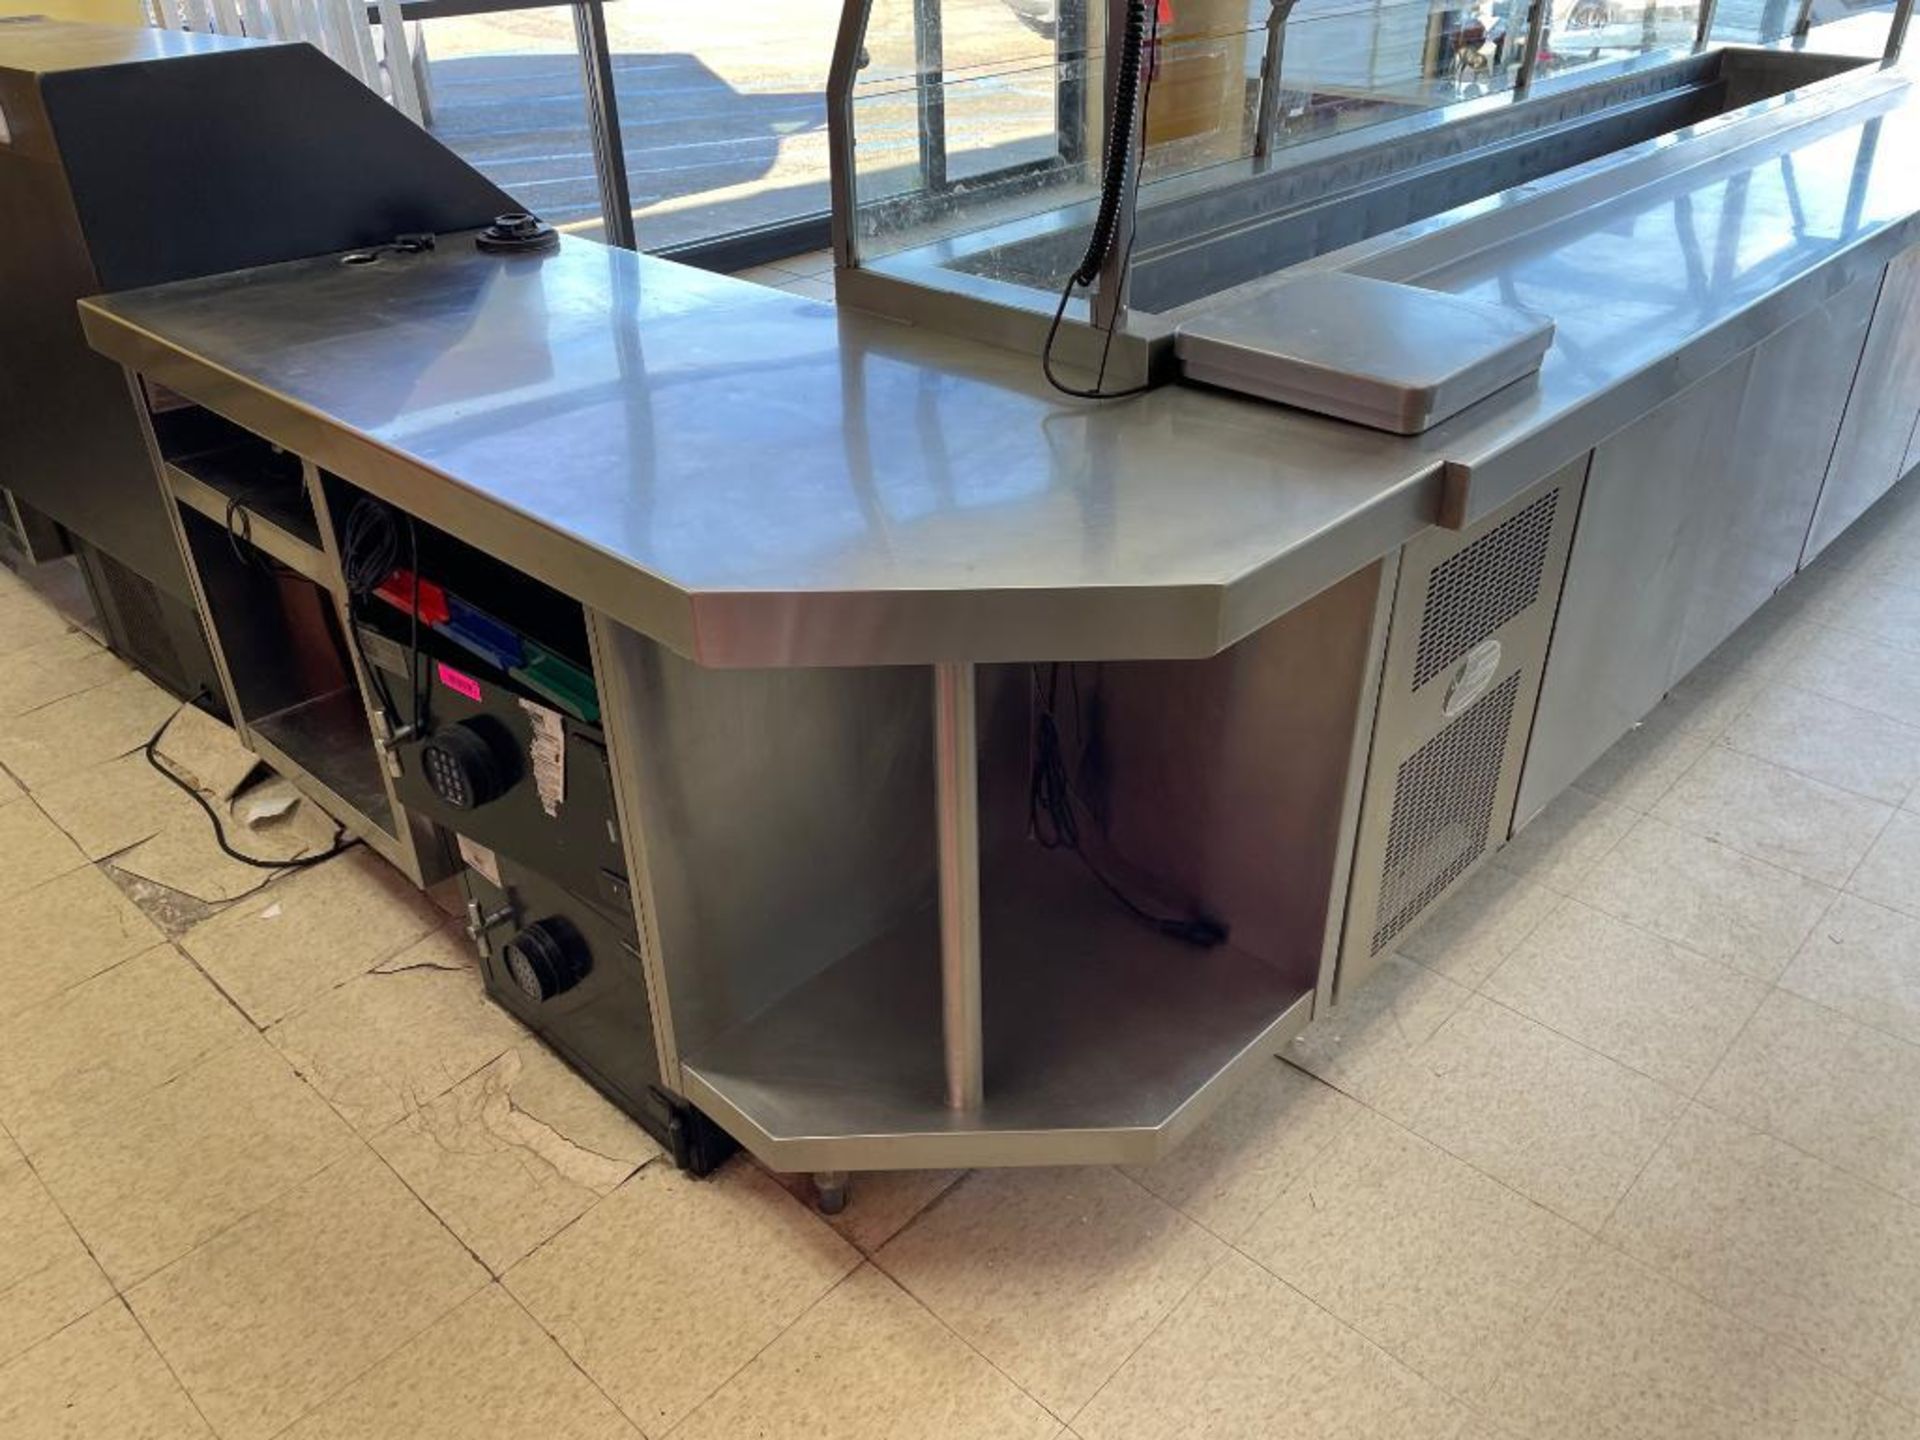 DESCRIPTION: (3) SECTIONS OF STAINLESS SALES COUNTER / CABINETS. W/ ELECTRICAL OUTLETS. ADDITIONAL I